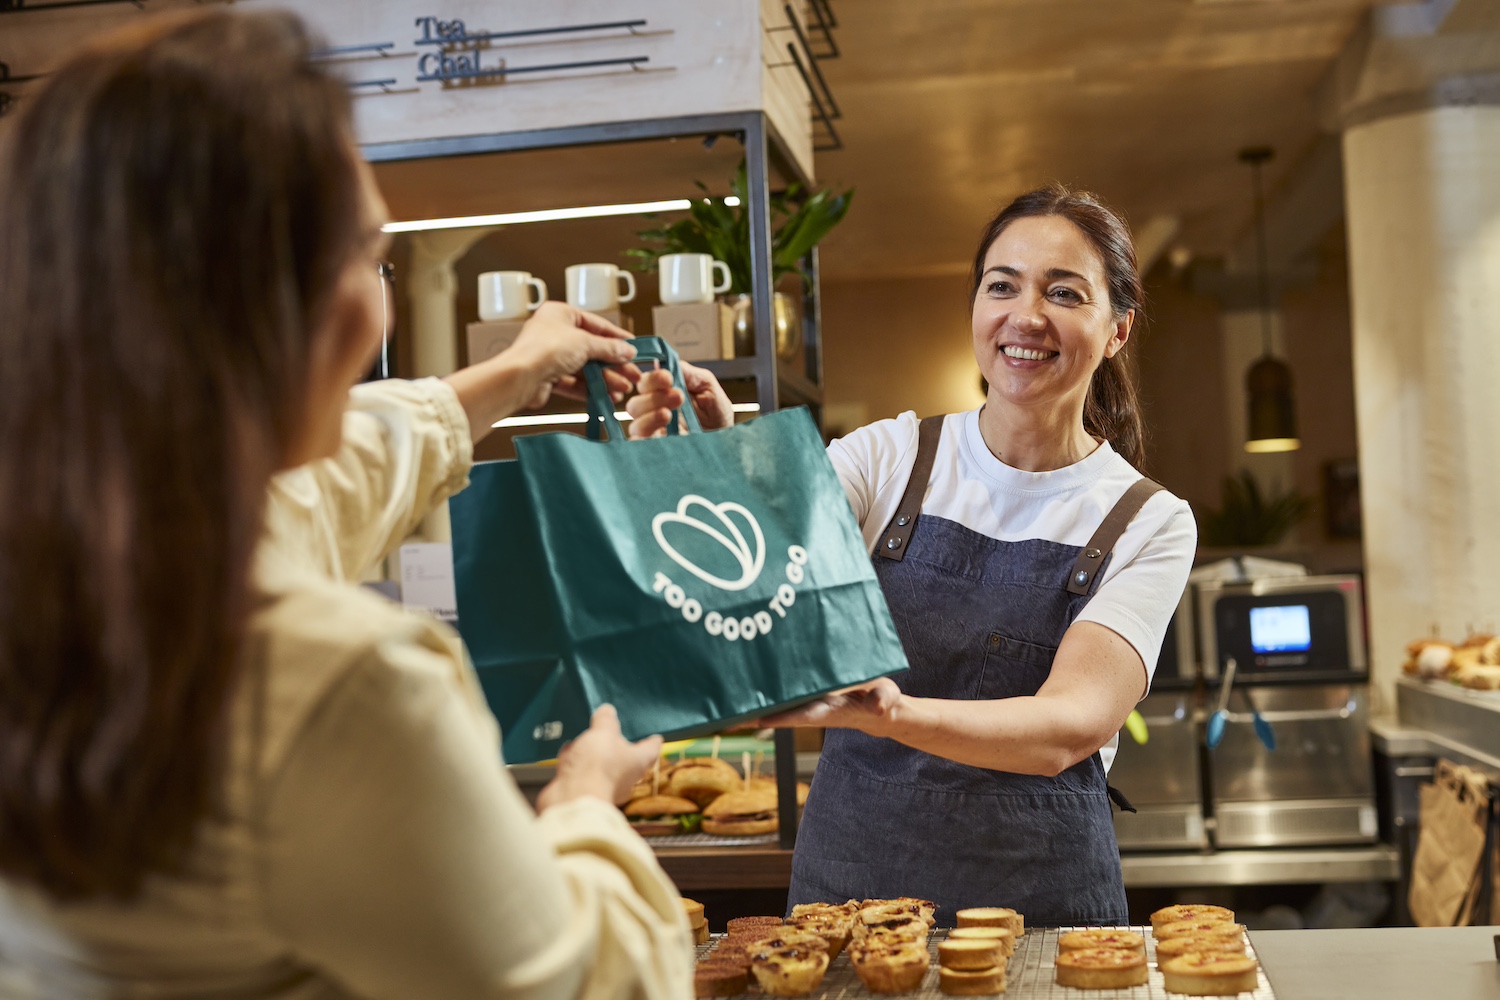 A person picks up a Too Good to Go surprise bag of food at a bakery. 